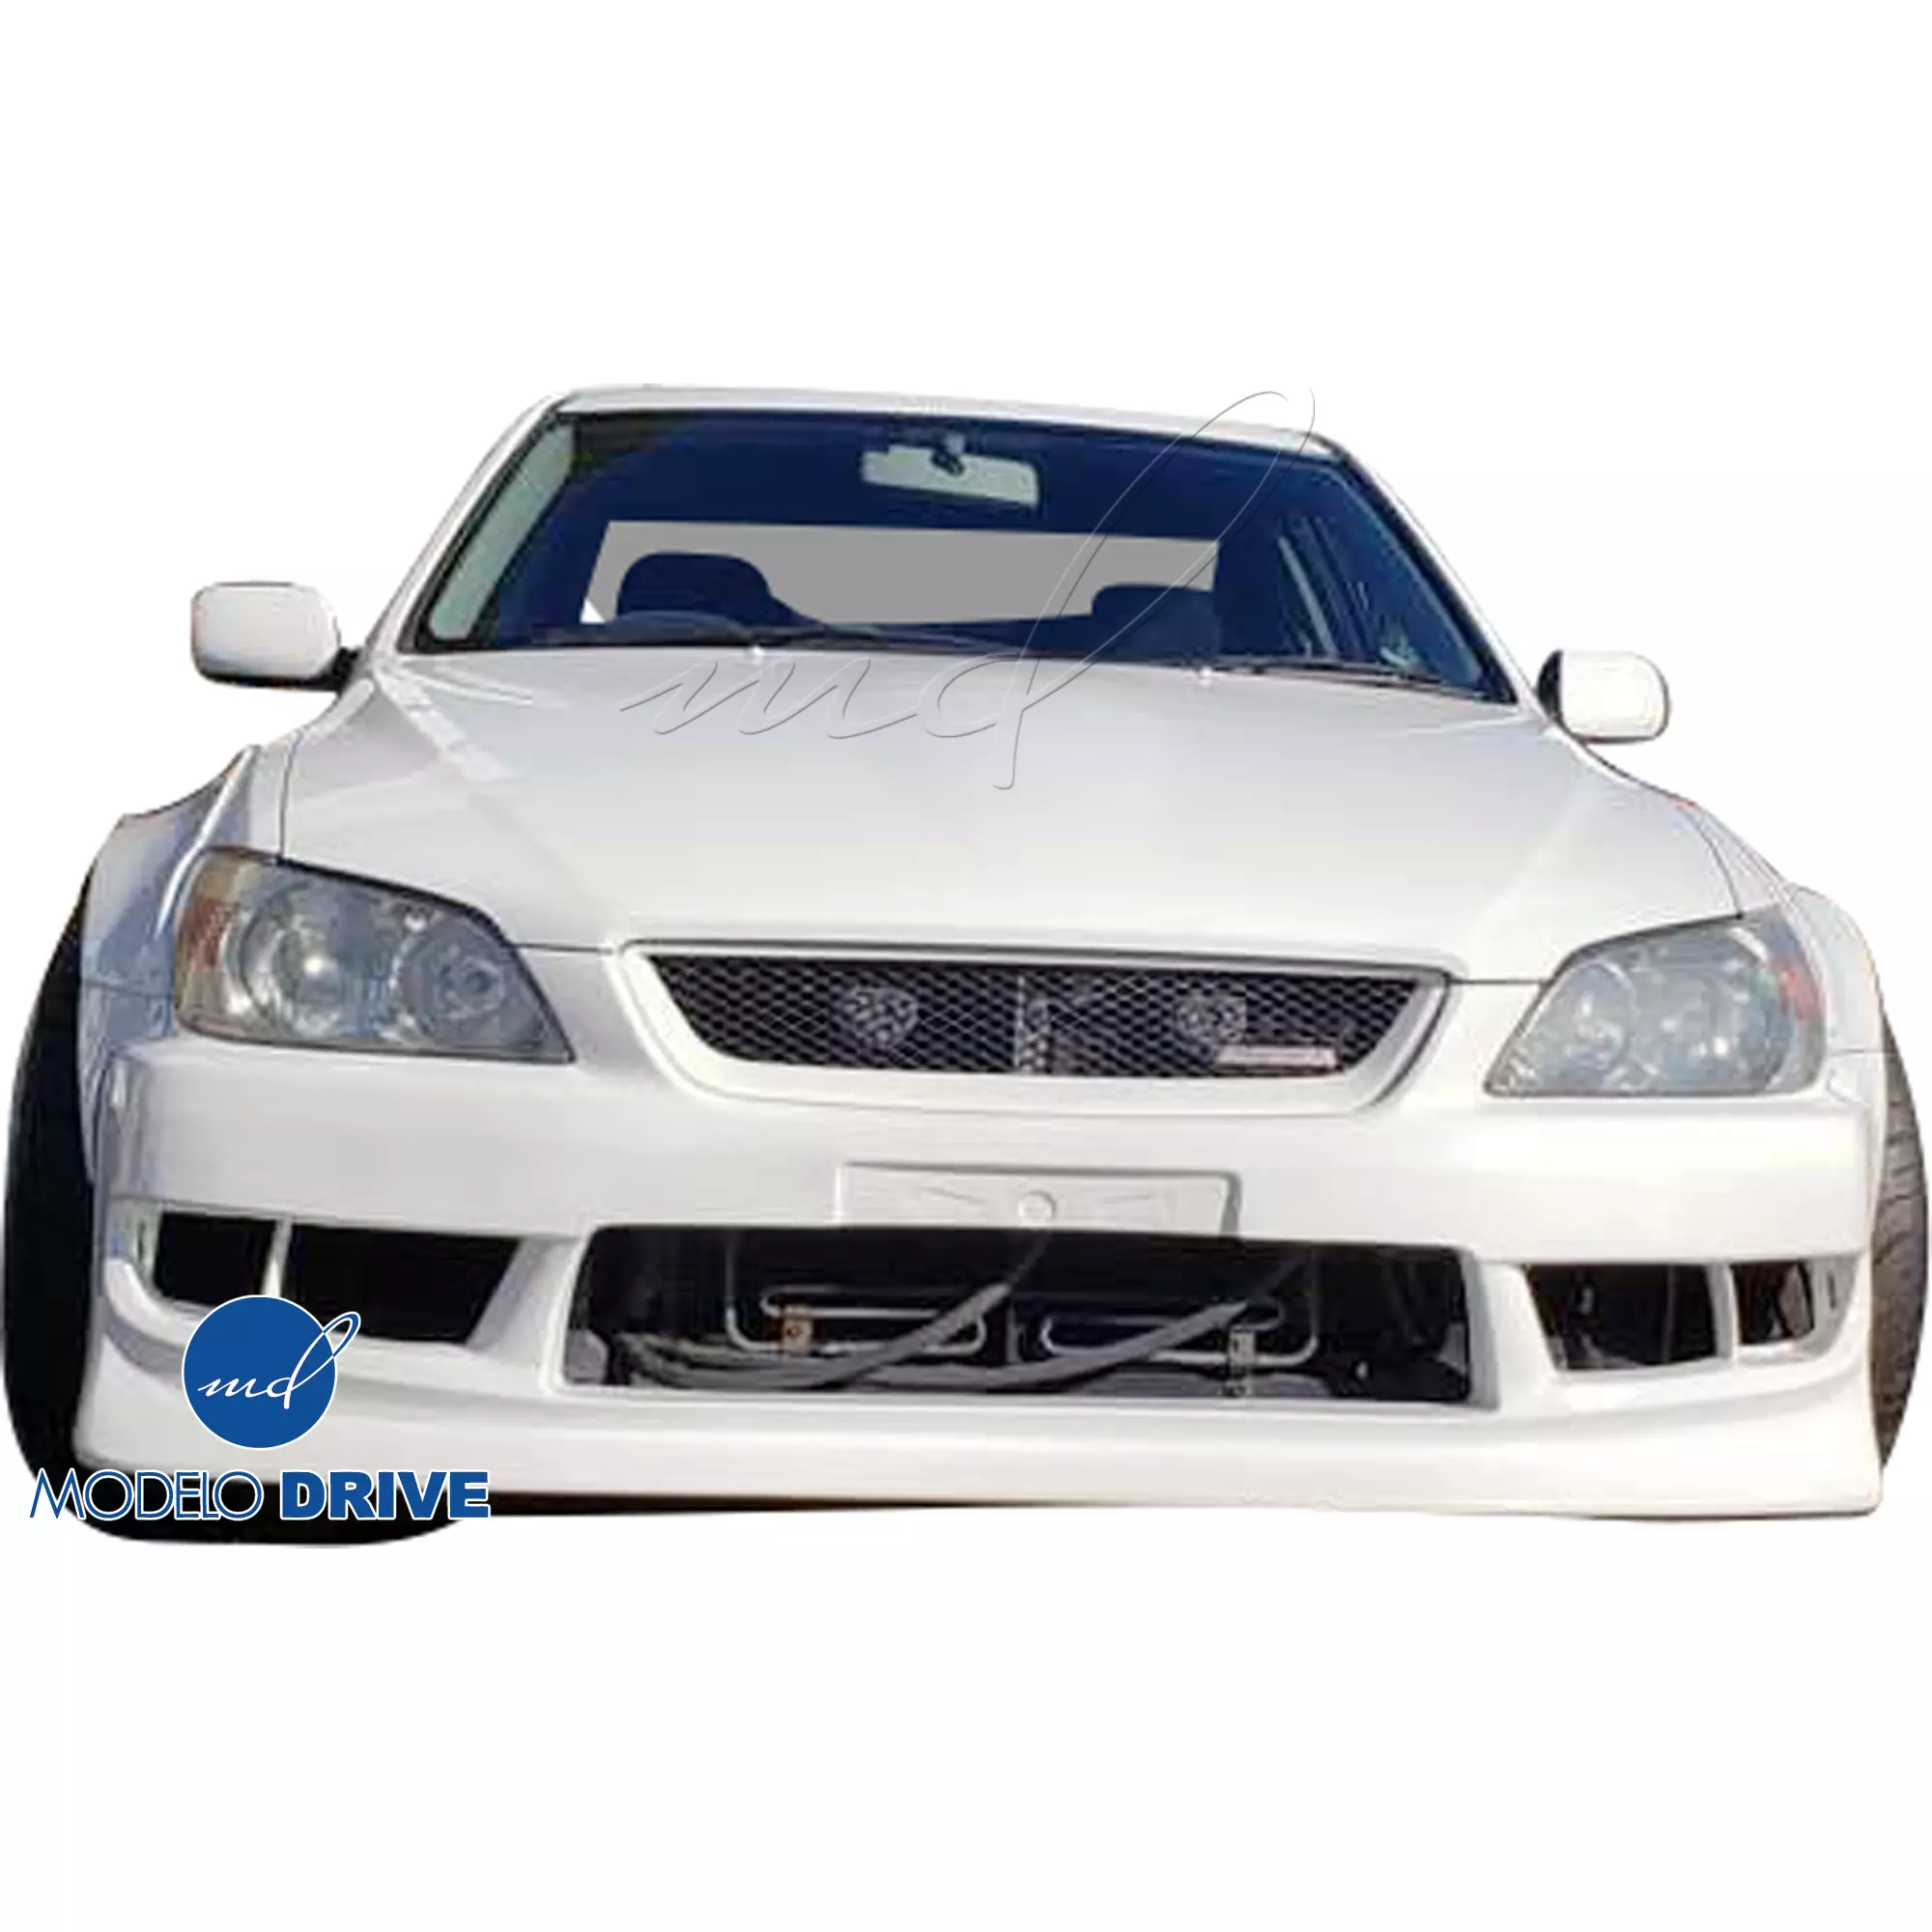 ModeloDrive FRP MSV Wide Body 40mm Fender Flares (front) 4pc > Lexus IS Series IS300 2000-2005> 4dr - Image 1